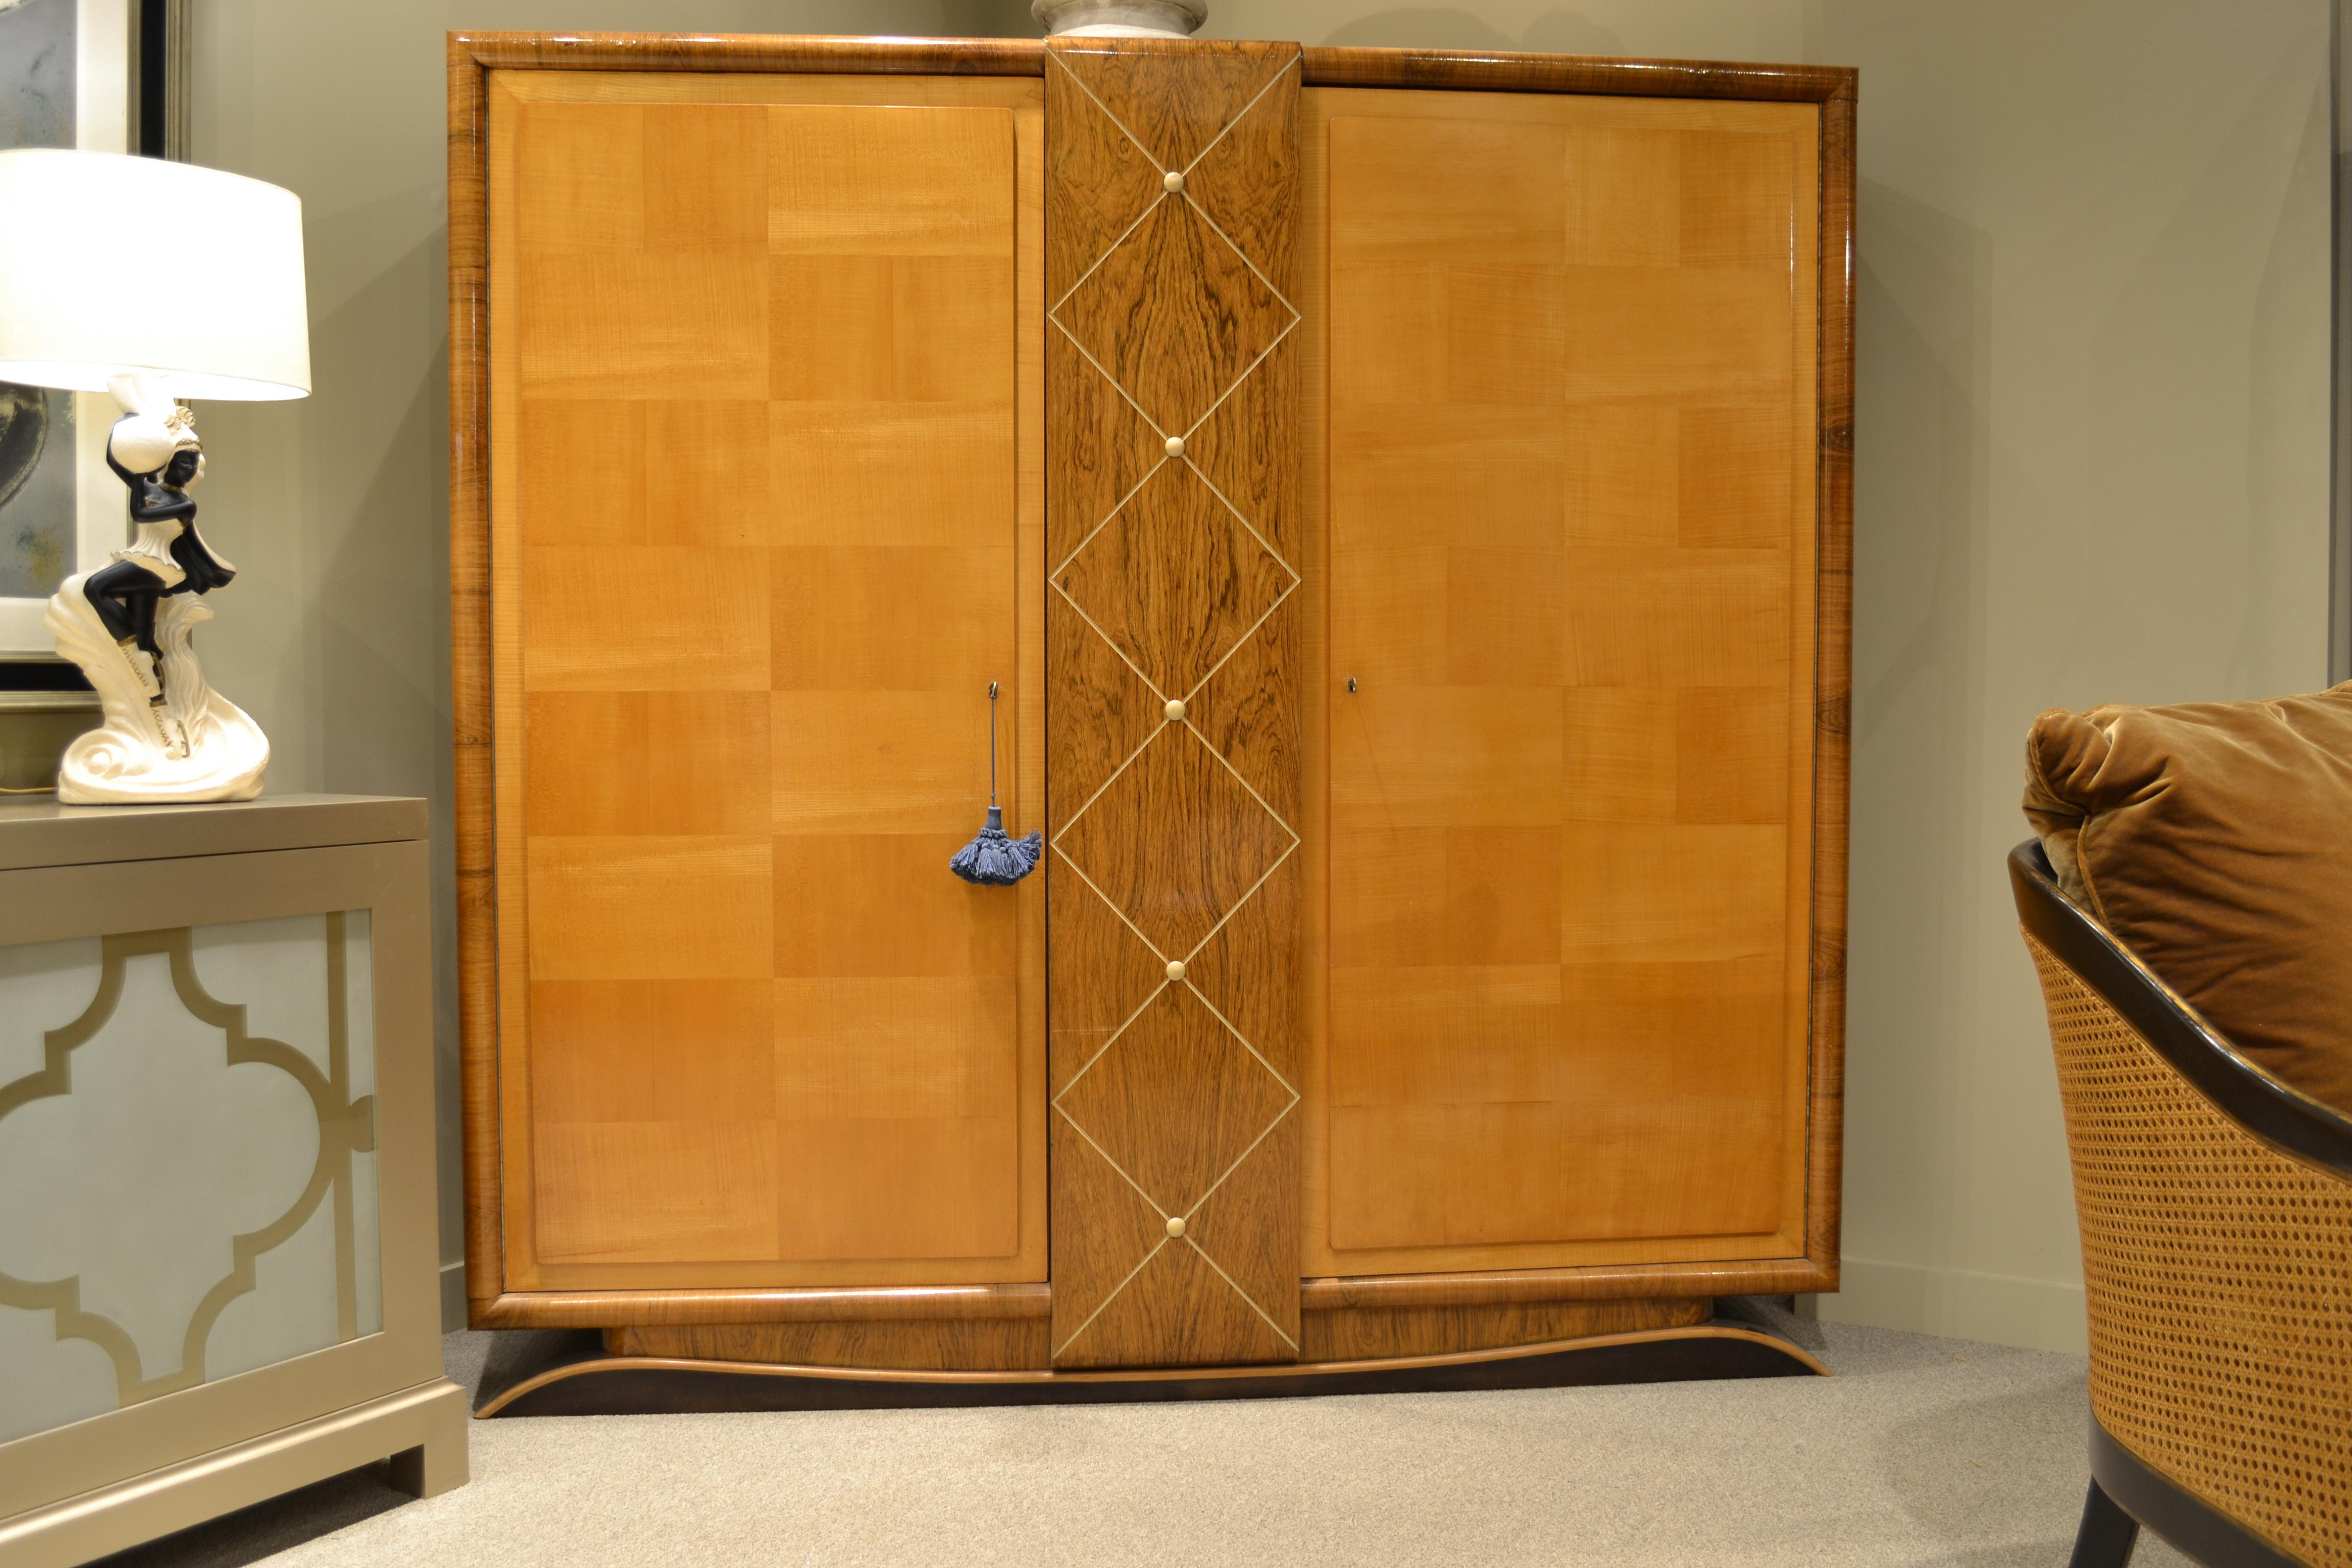 This 1940s cabinet has a shaped walnut, beech and rosewood base supporting a rosewood veneered case and a center vertical panel of the same veneer. This panel is crisscrossed with an ivory incised diamond grid highlighted with ivory colored discs.